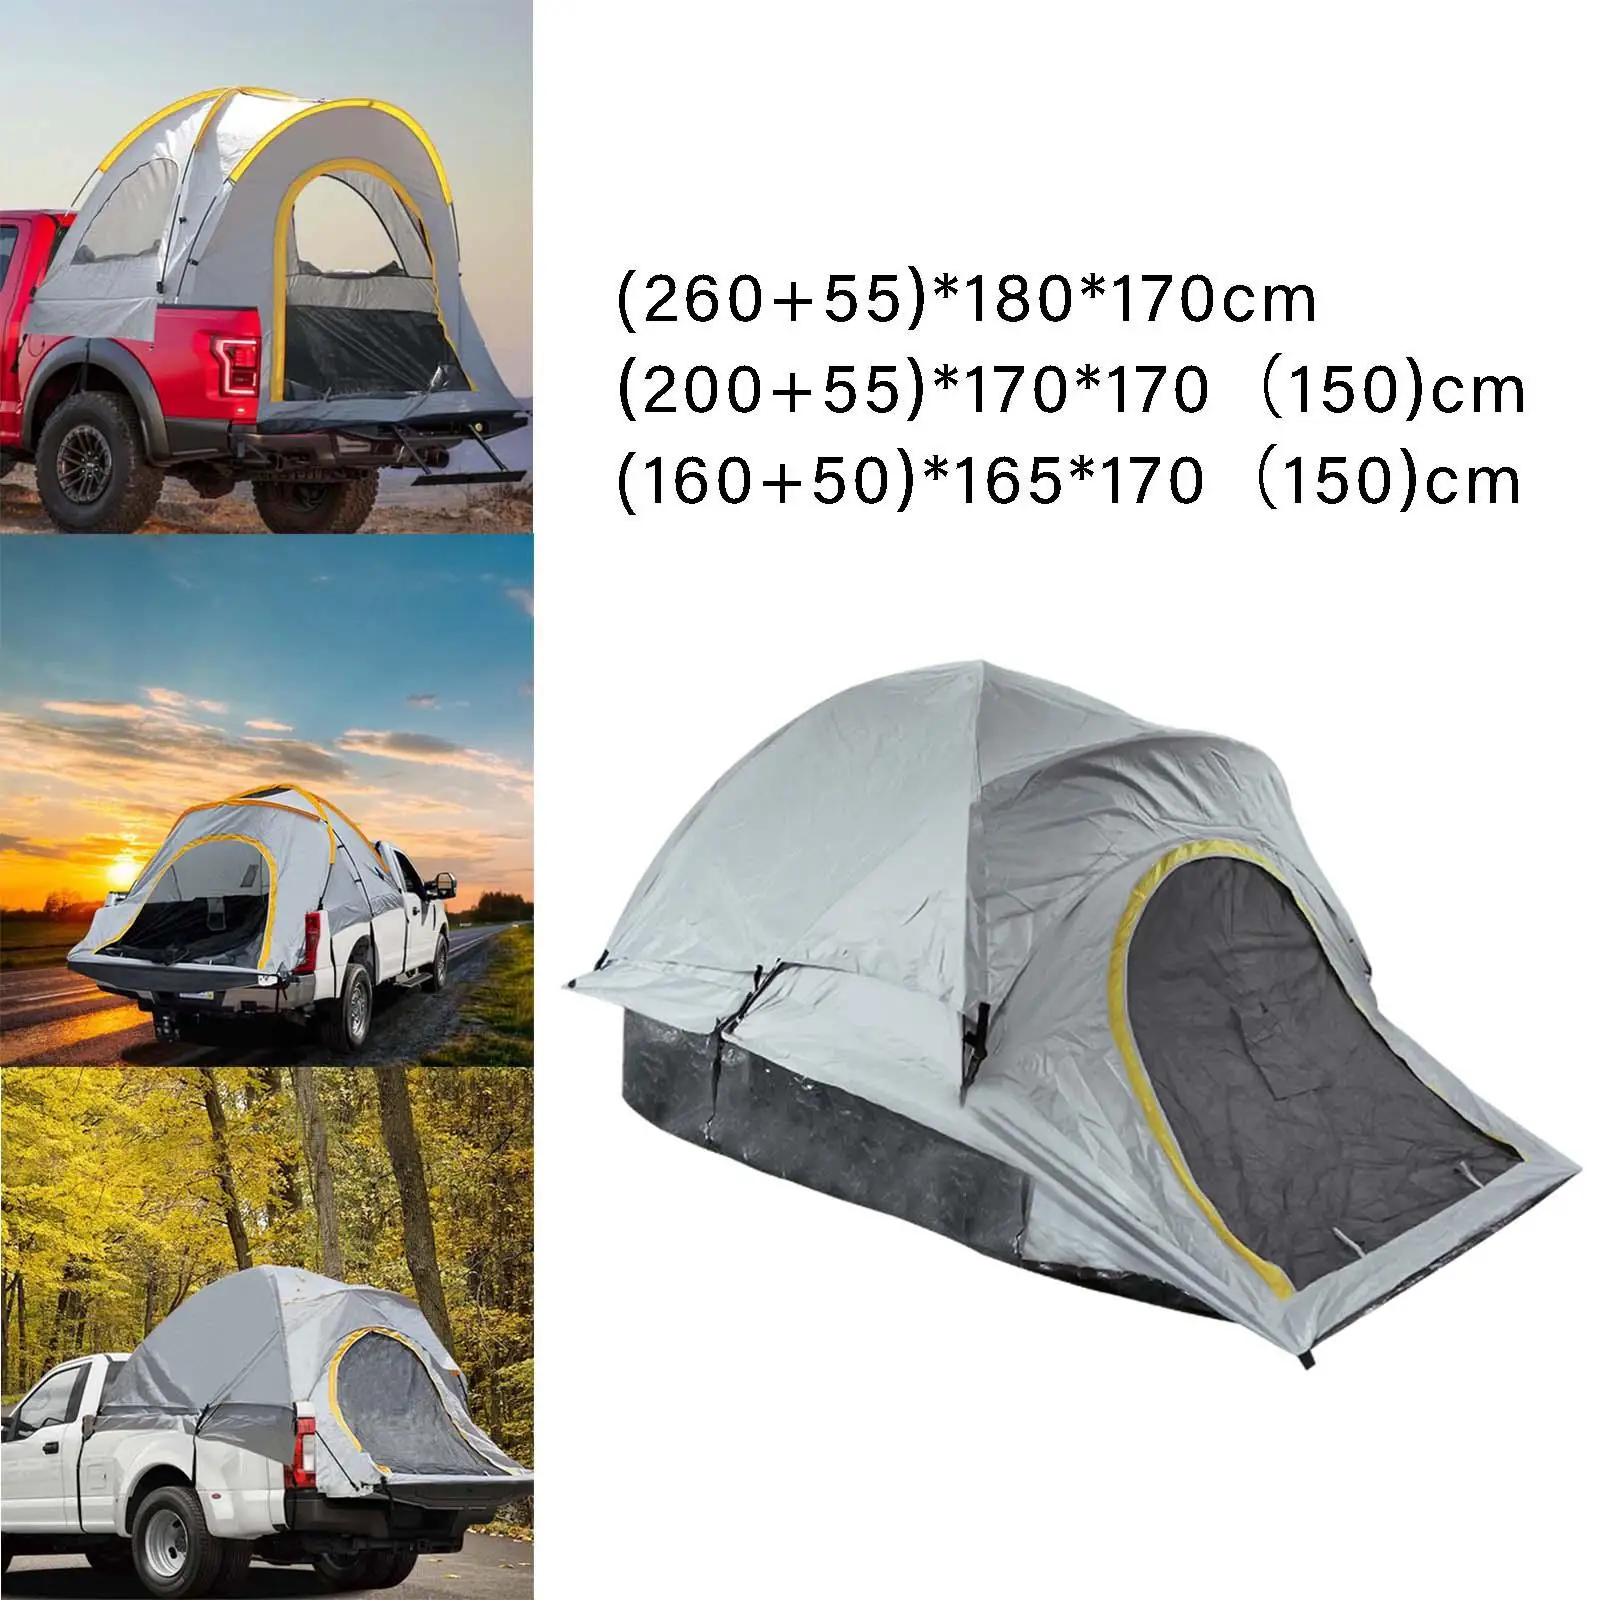 Pickup Truck Bed Tent Waterproof Shade Awning Shelter Canopy 3-4 Person for SUV Fishing Barbecue Beach Outdoor Camping